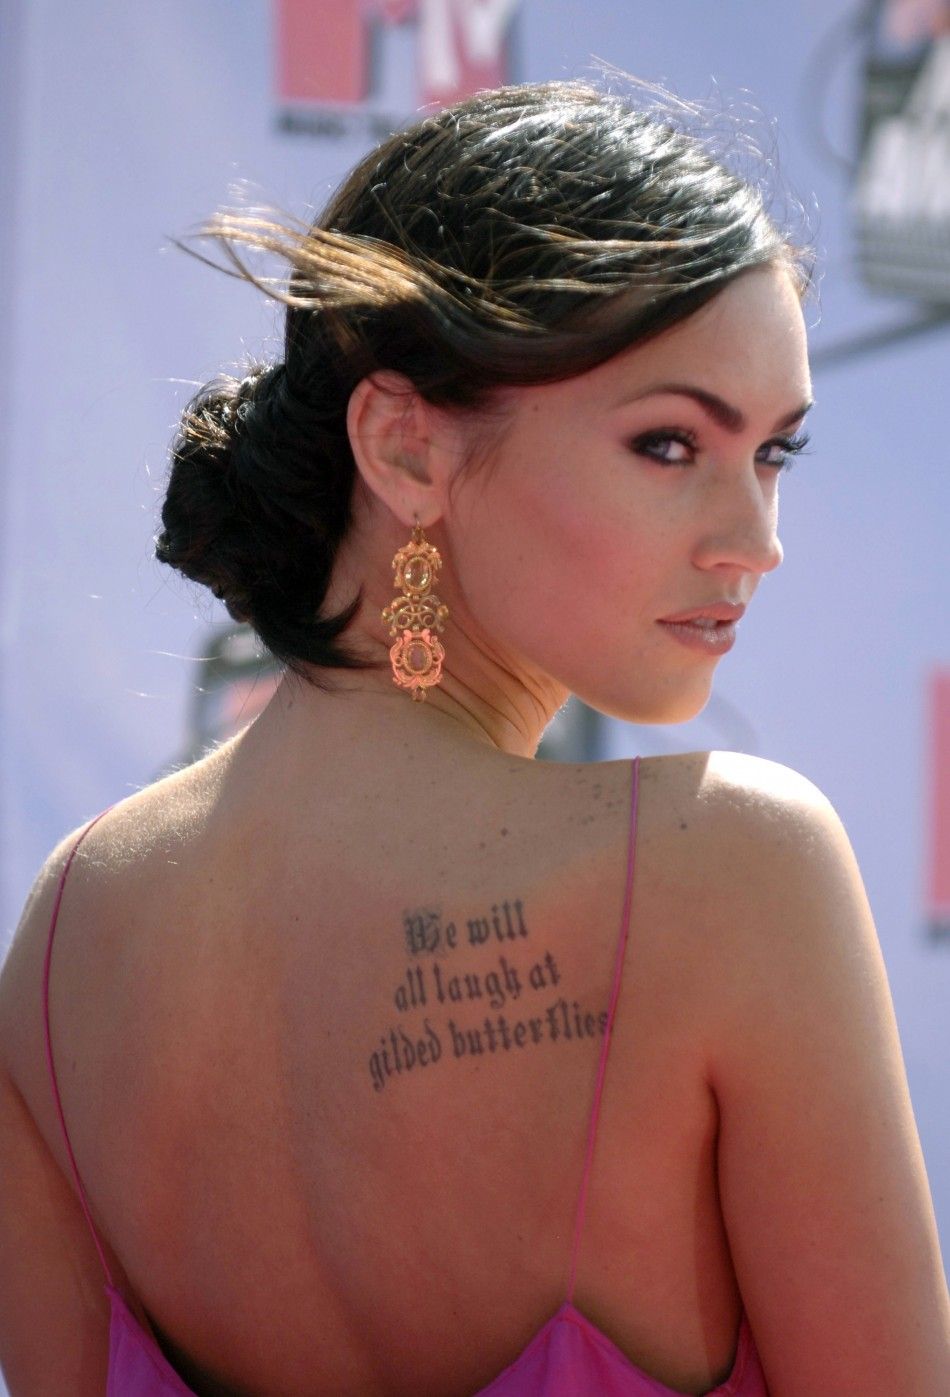 From Amy Winehouse to David Beckham Worlds Top 10 Incredible Celebrity Tattoos.